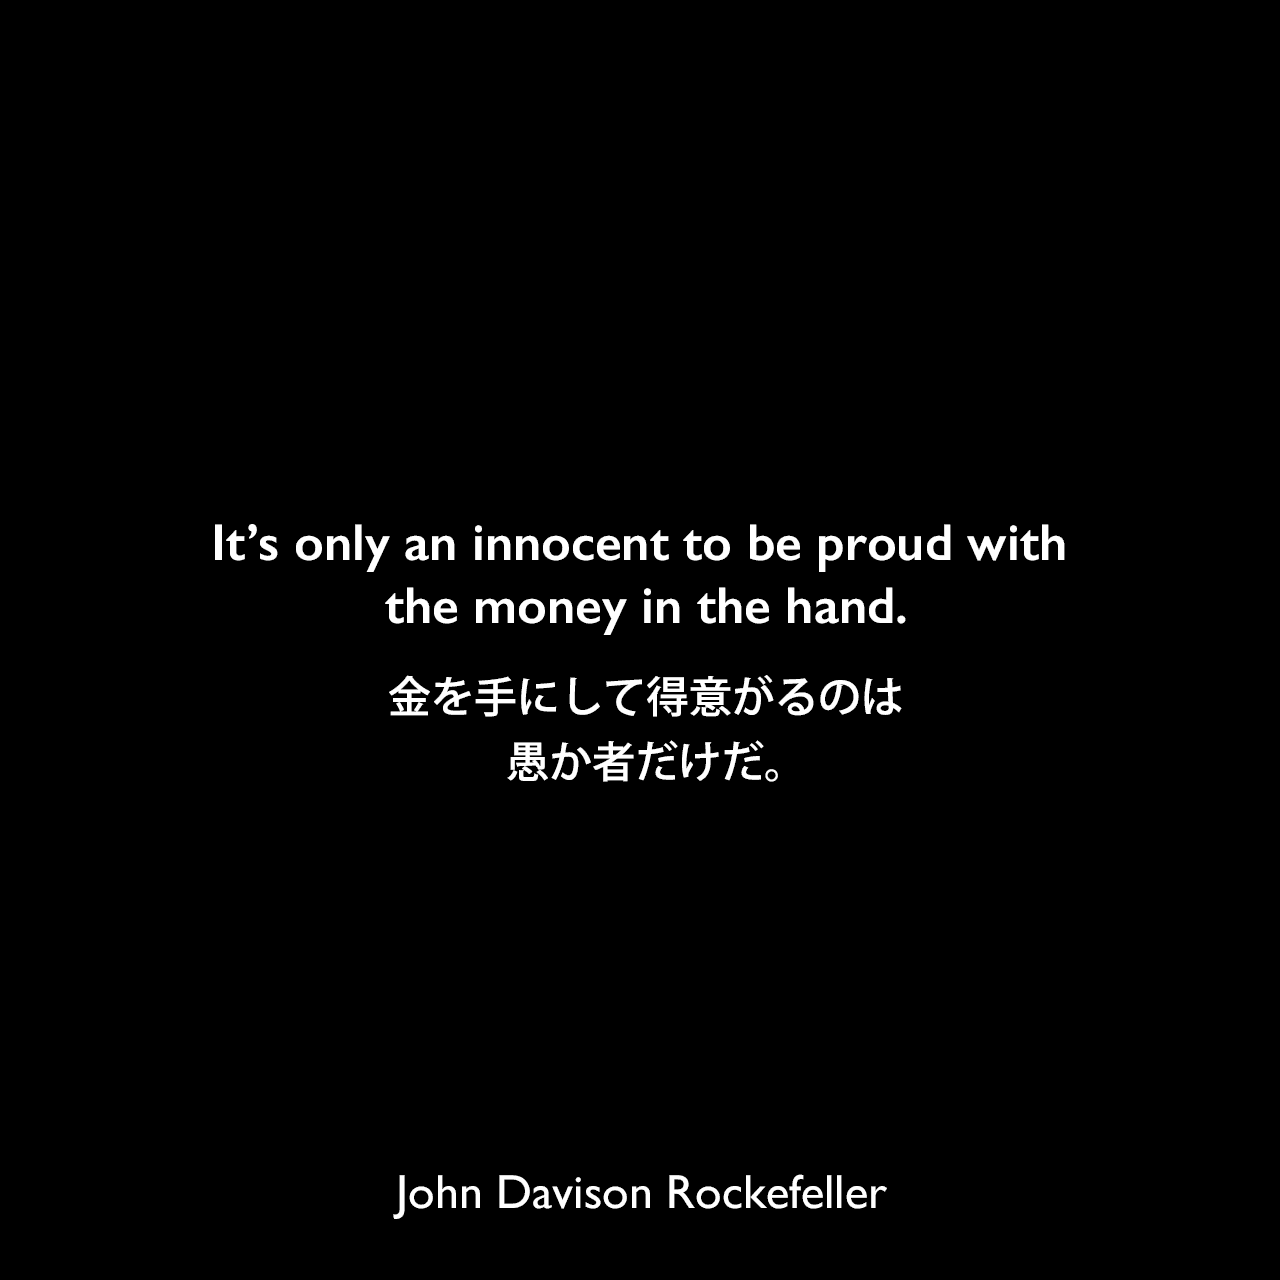 It’s only an innocent to be proud with the money in the hand.金を手にして得意がるのは、愚か者だけだ。John Davison Rockefeller